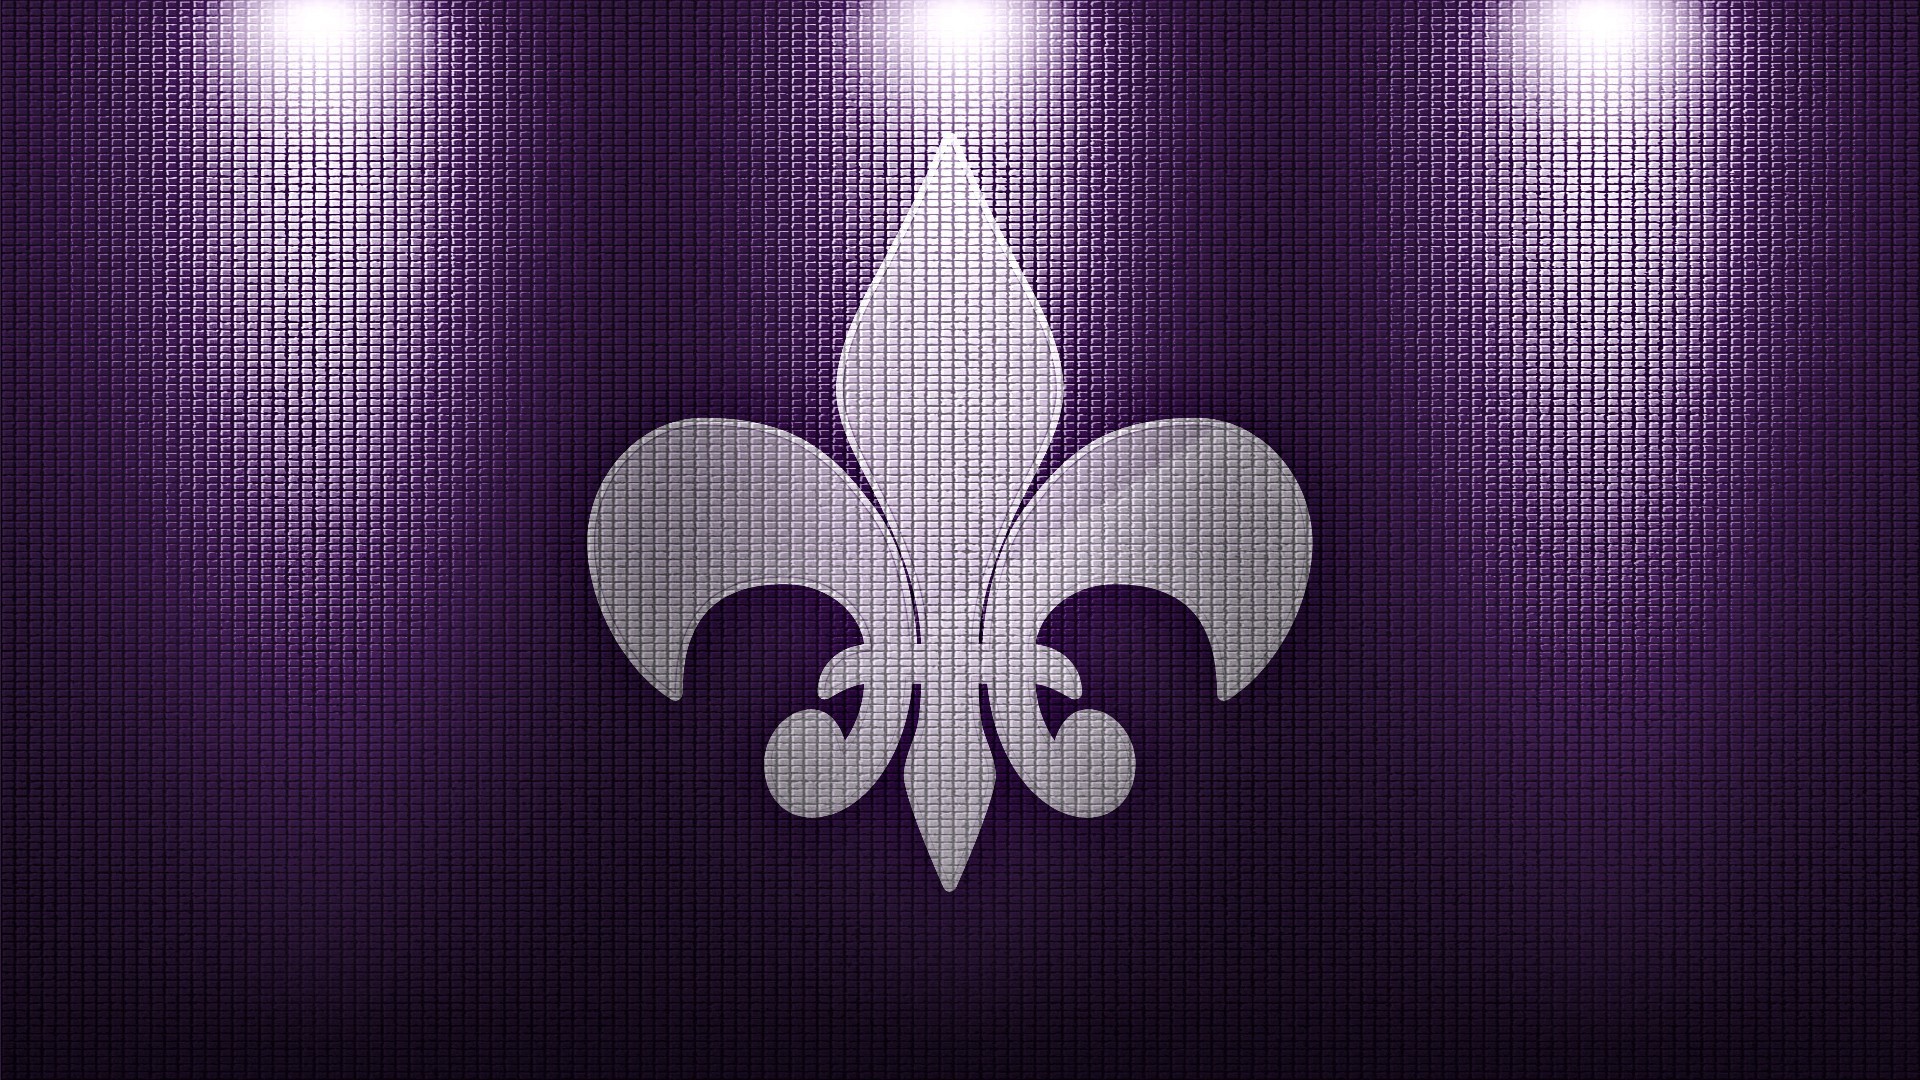 Saints Row the Third Wallpapers  Top Free Saints Row the Third Backgrounds   WallpaperAccess